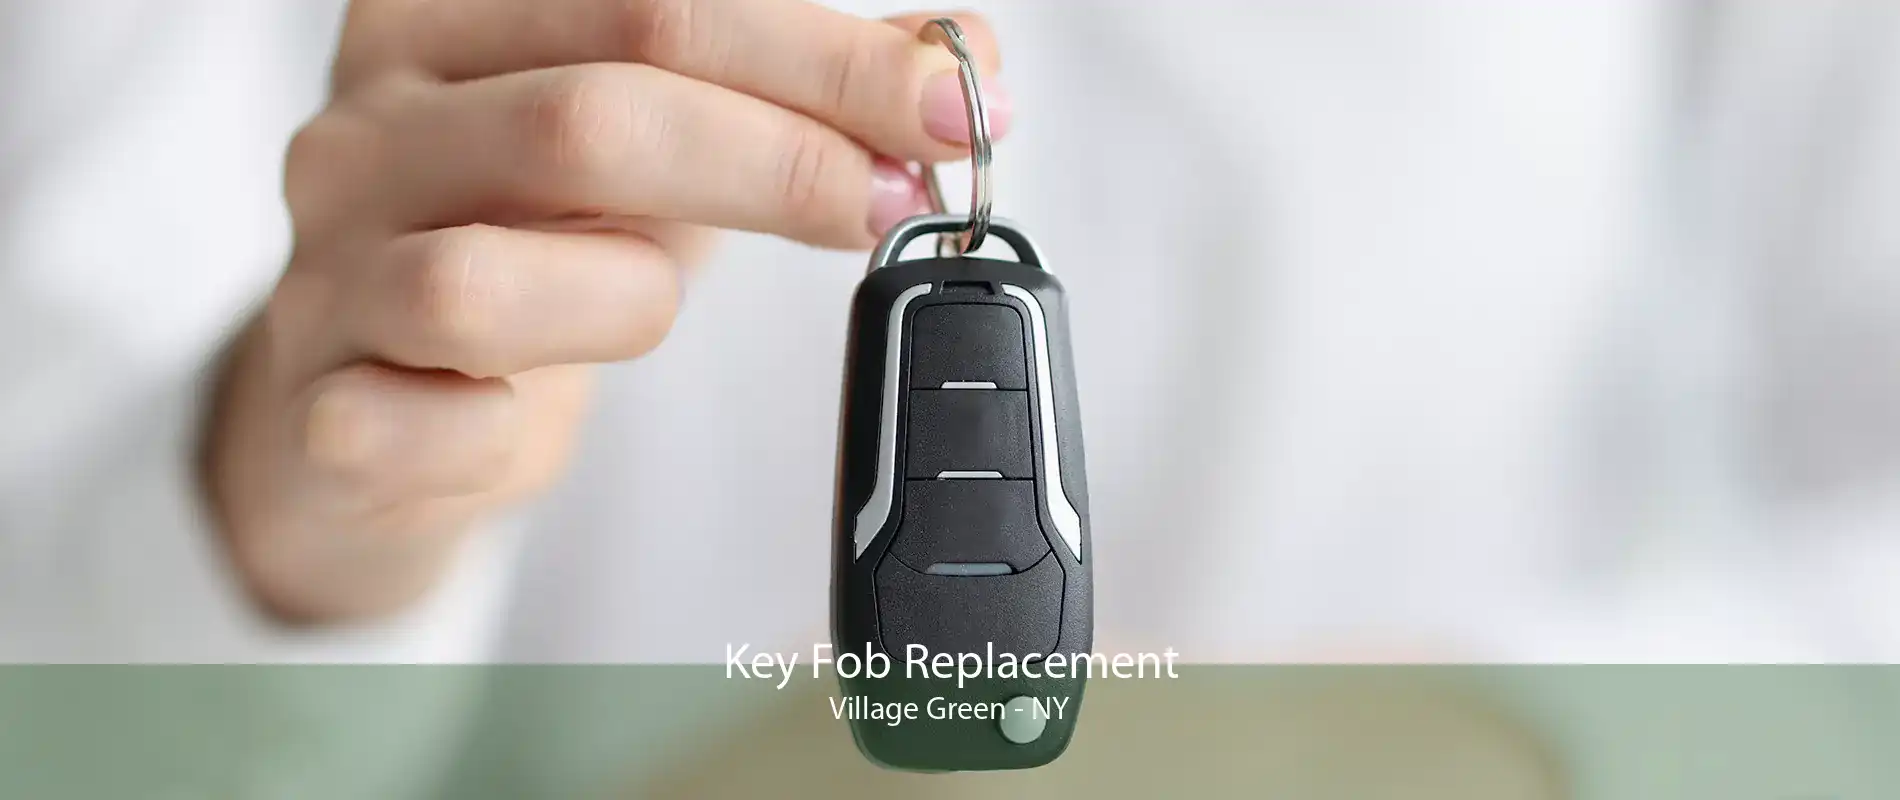 Key Fob Replacement Village Green - NY